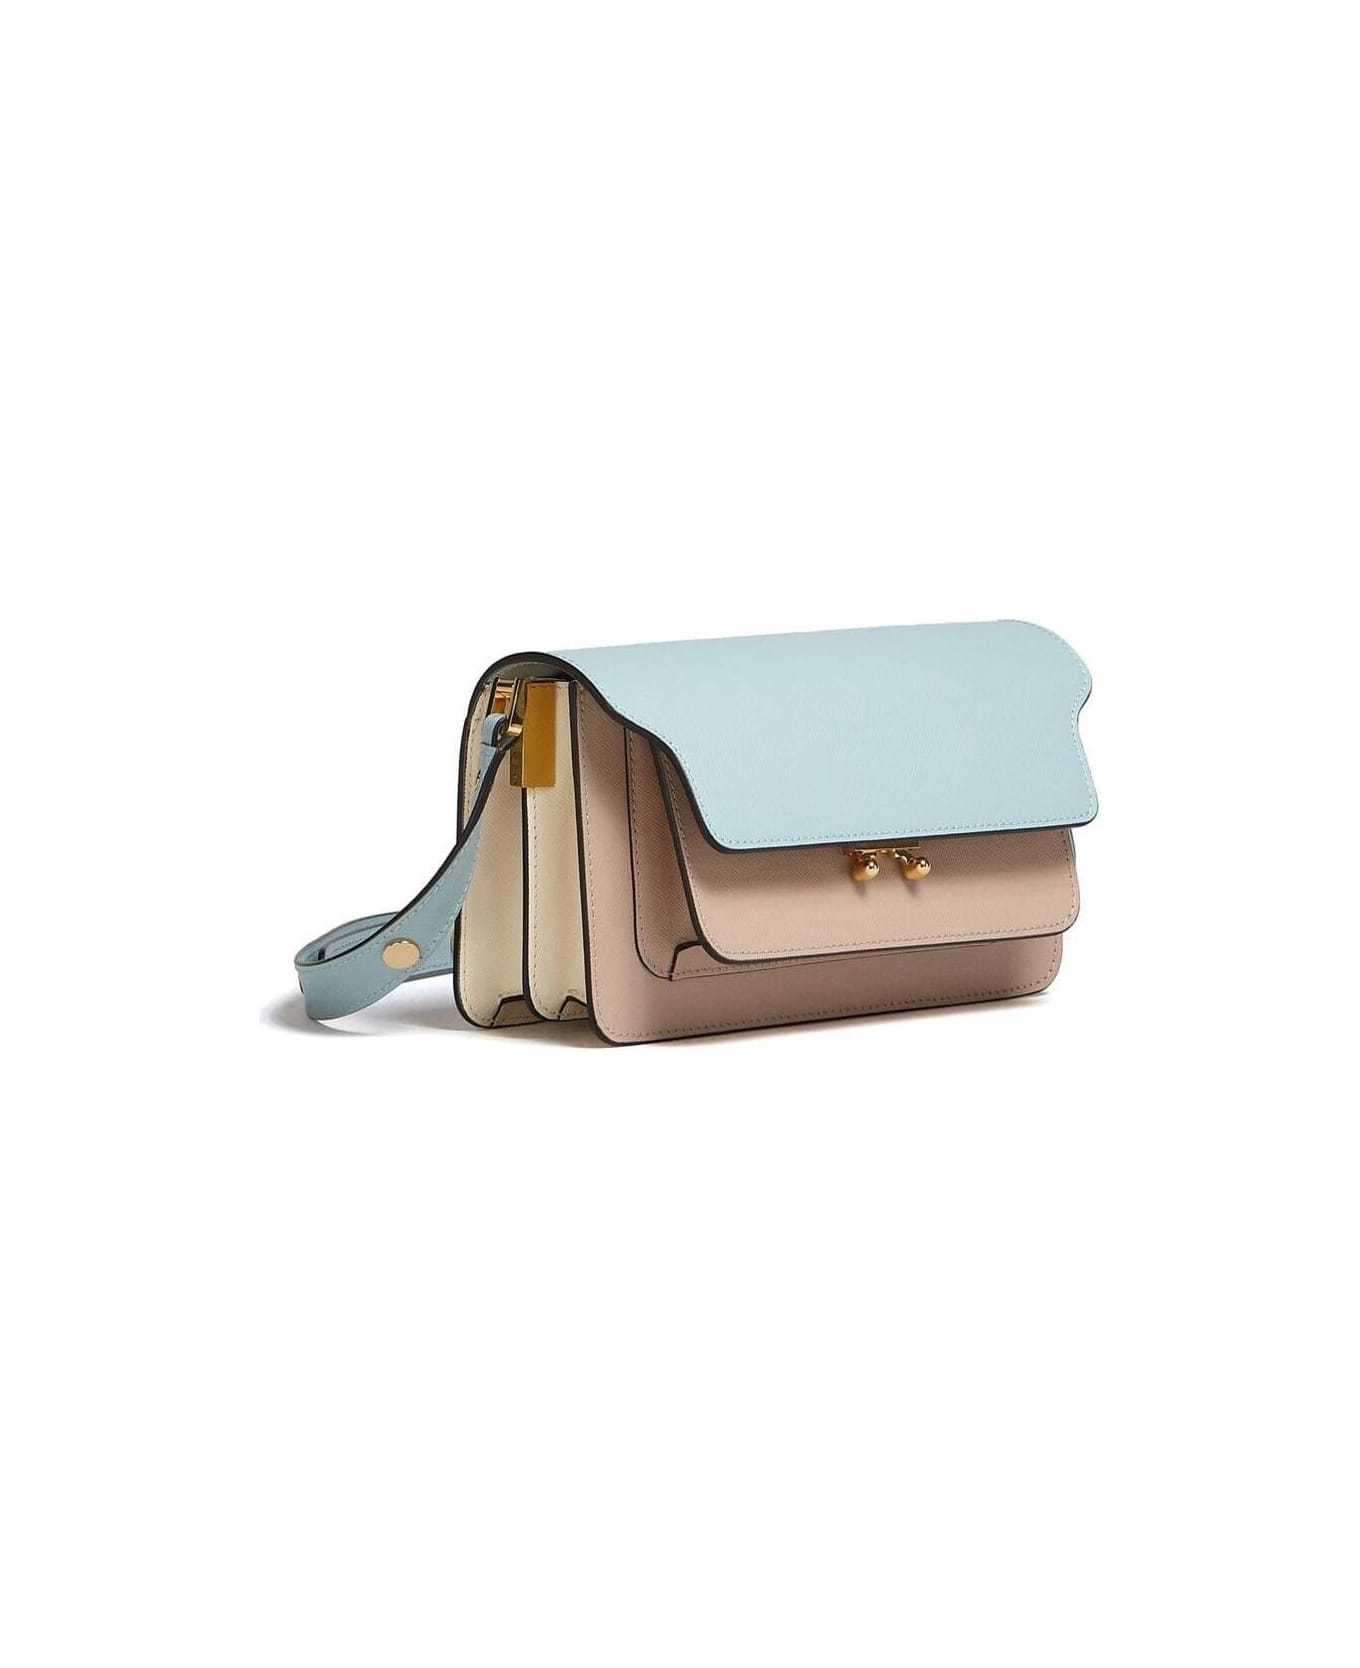 Marni Pink And Light-bluetrunk Crossbody Bag In Saffiano Leather Woman - Multicolor